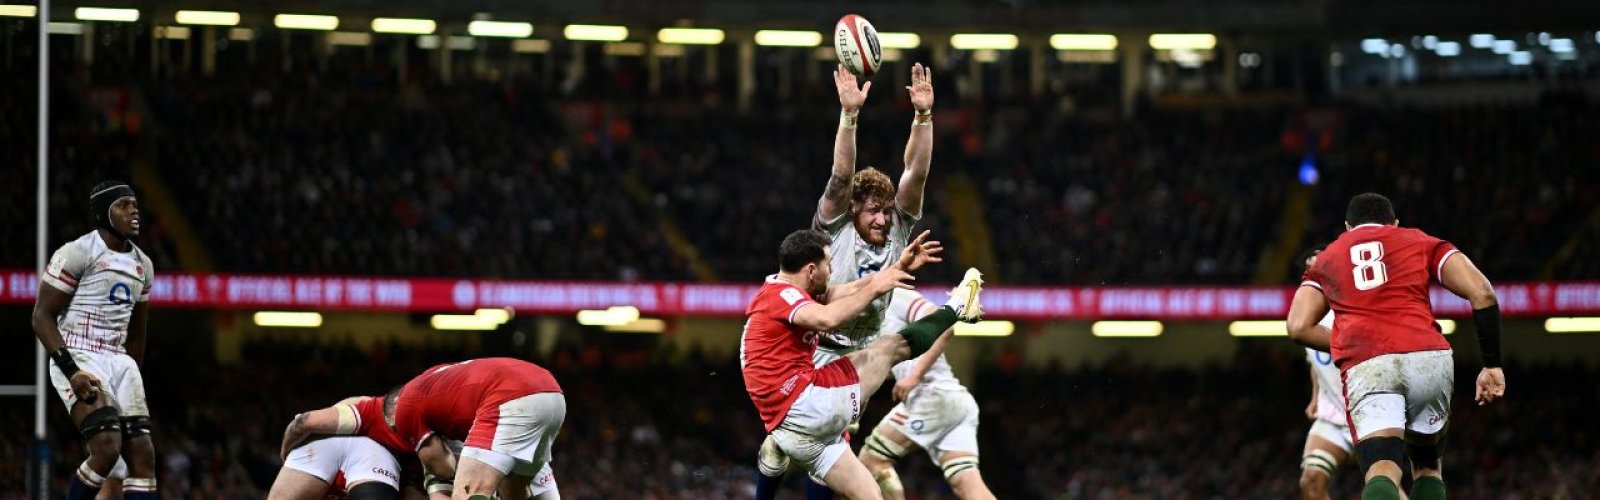 Wales v England ticket hospitality package for rugby fans - Guinness Six Nations image